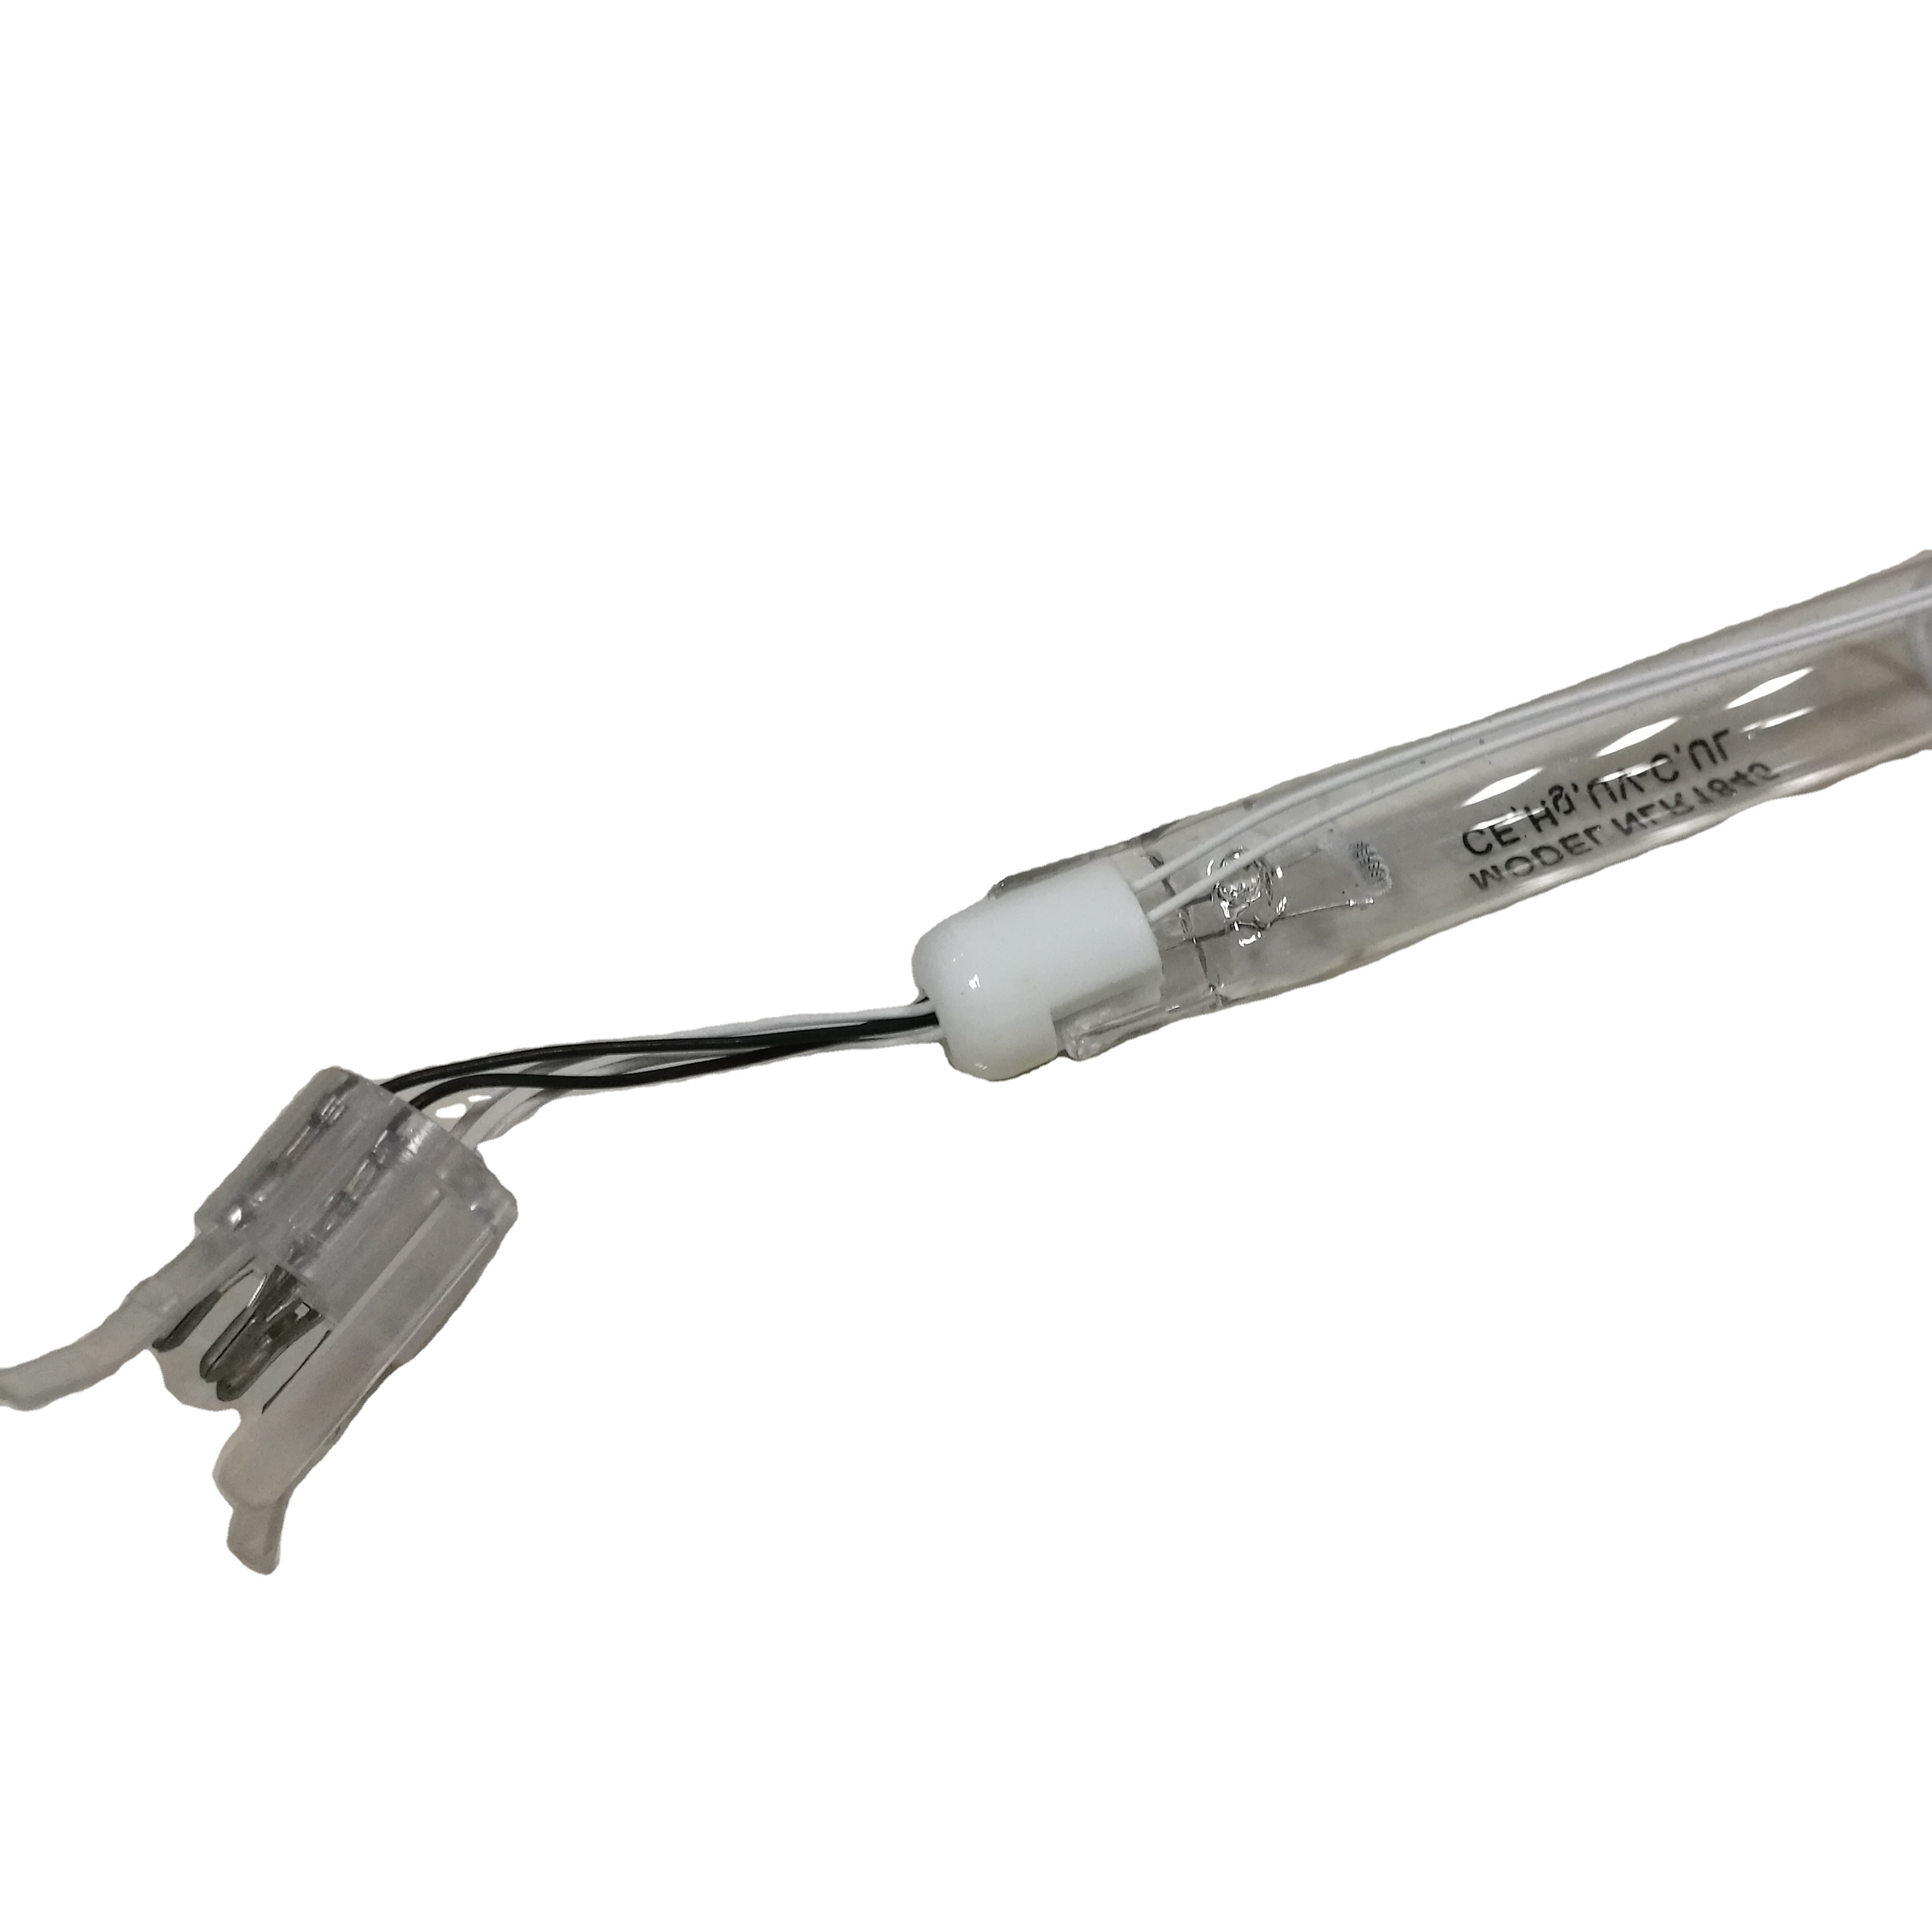 Wedeco XLR10 Equivalent Replacement UV Lamp